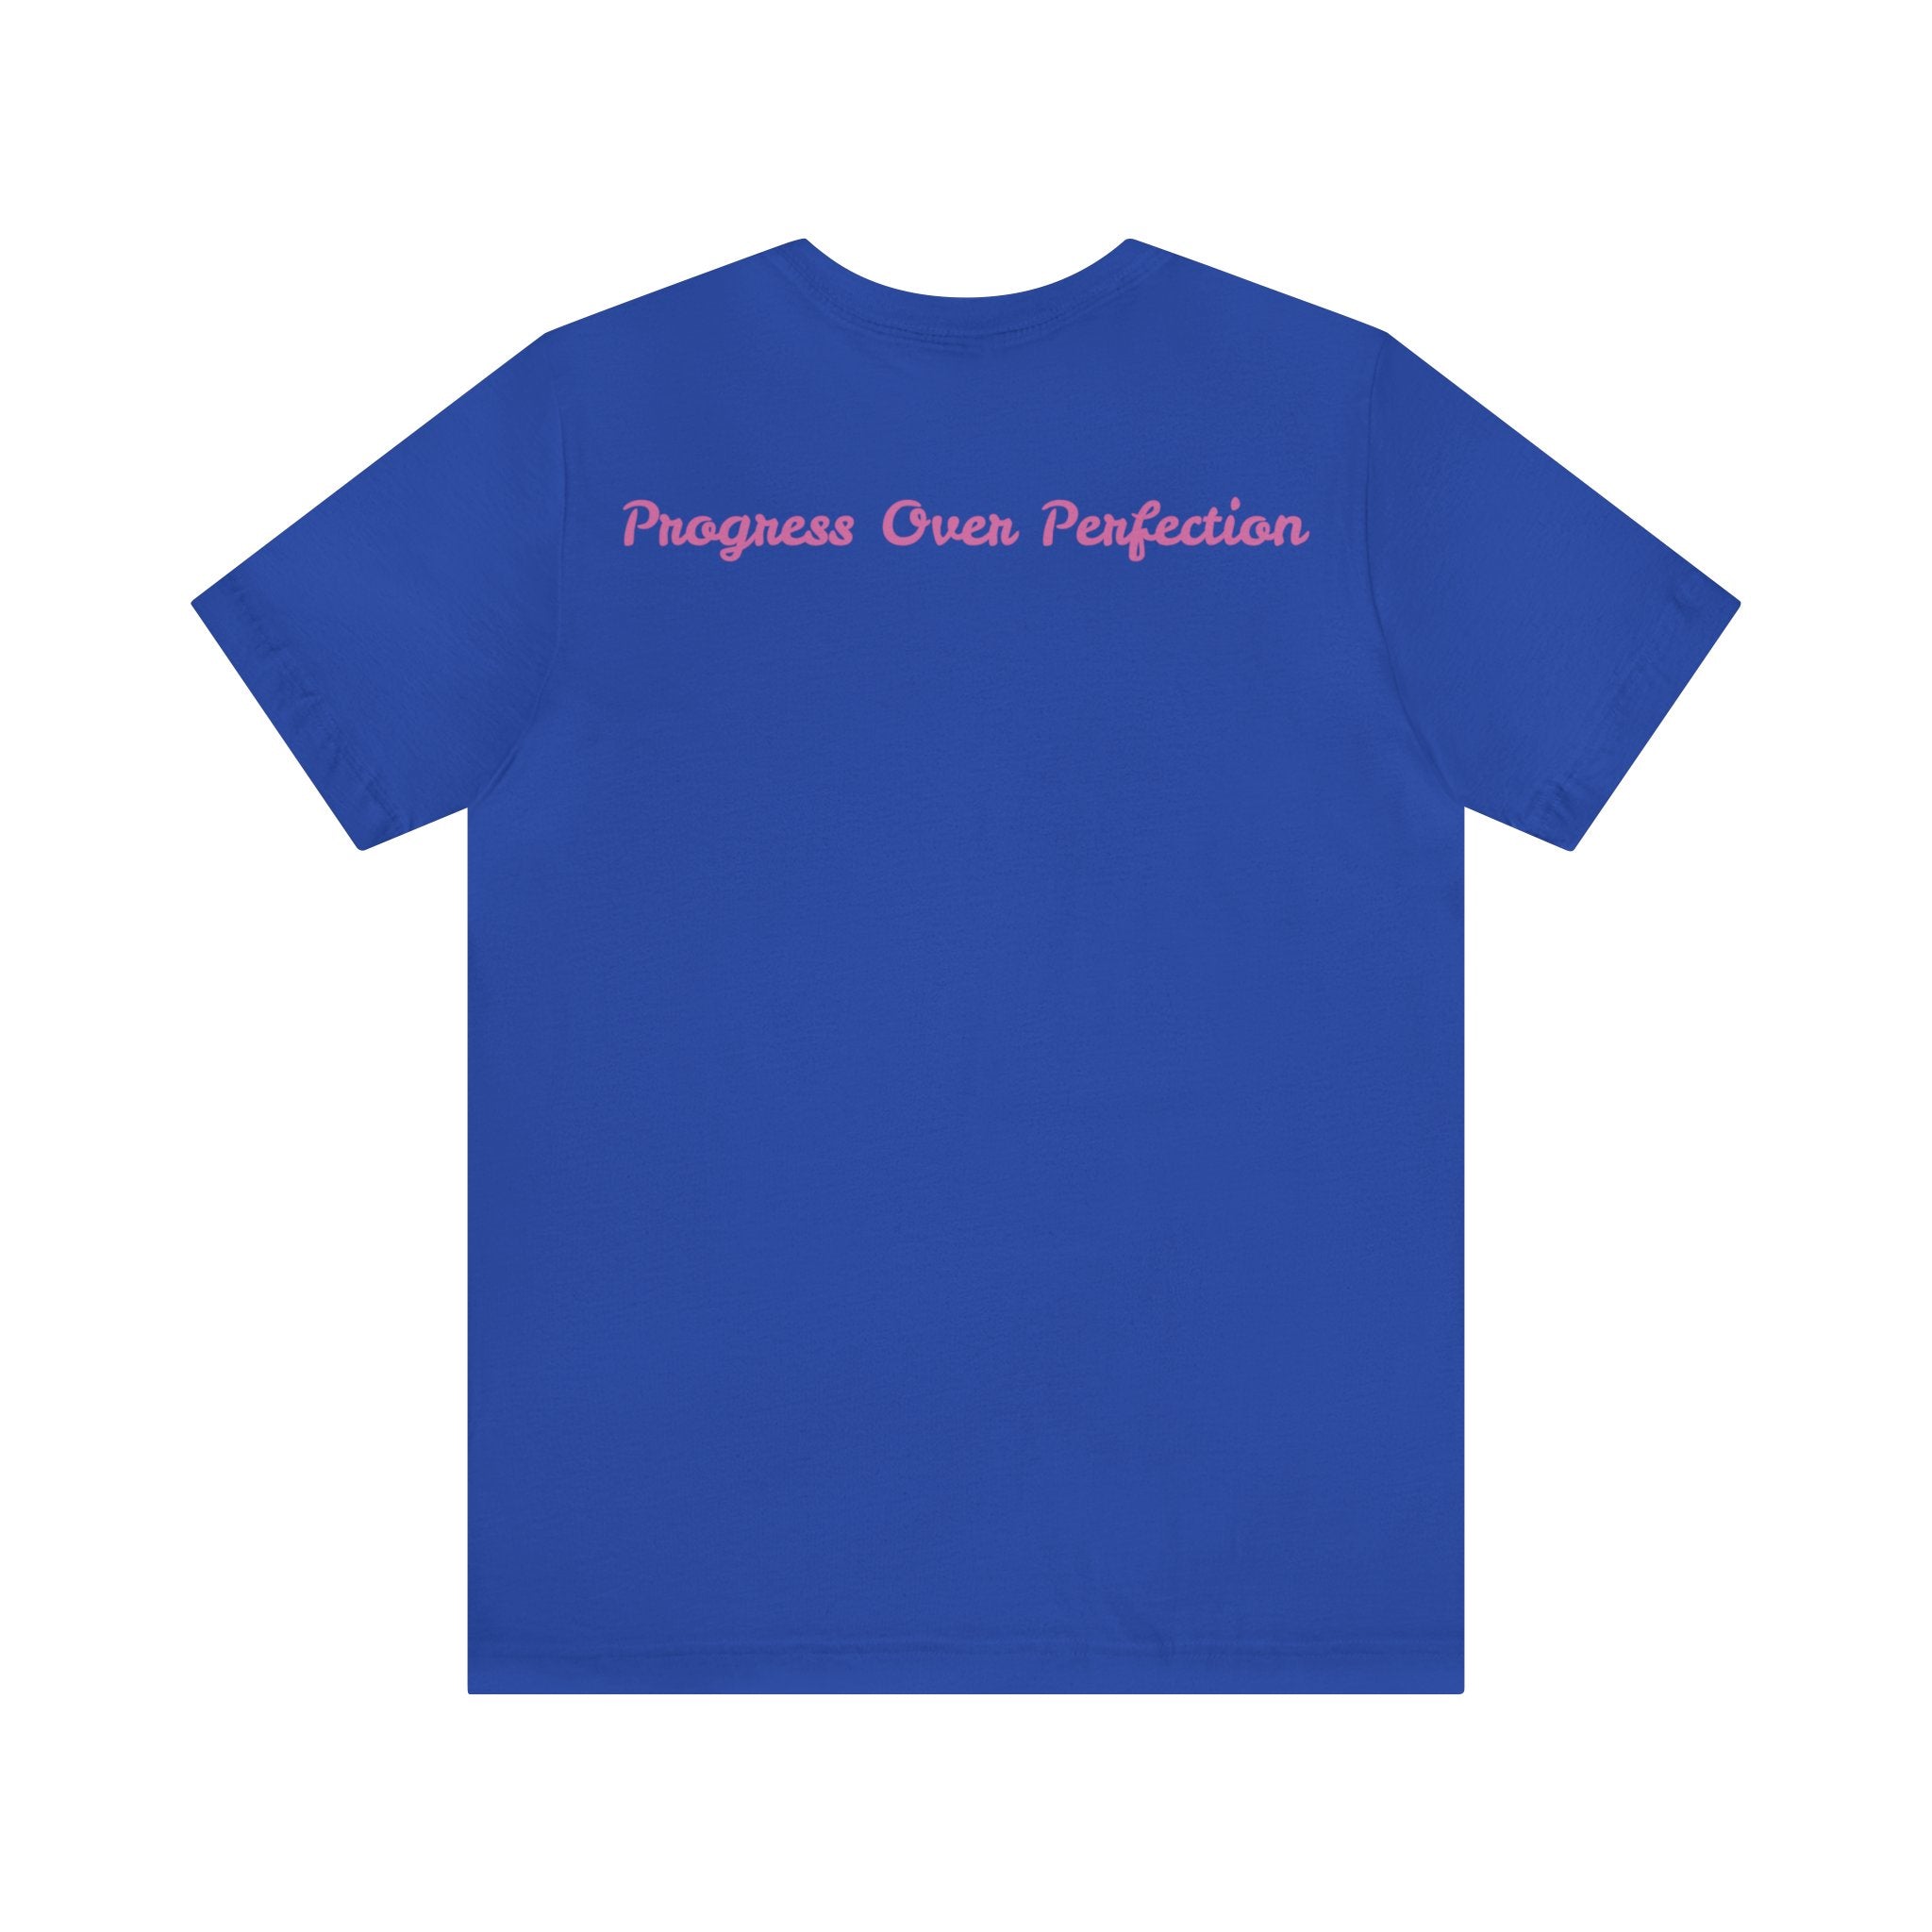 Progress Over Perfection Tee - Bella+Canvas 3001 Yellow Airlume Cotton Bella+Canvas 3001 Crew Neckline Jersey Short Sleeve Lightweight Fabric Mental Health Support Retail Fit Tear-away Label Tee Unisex Tee T-Shirt 14398440224879631418_2048 Printify